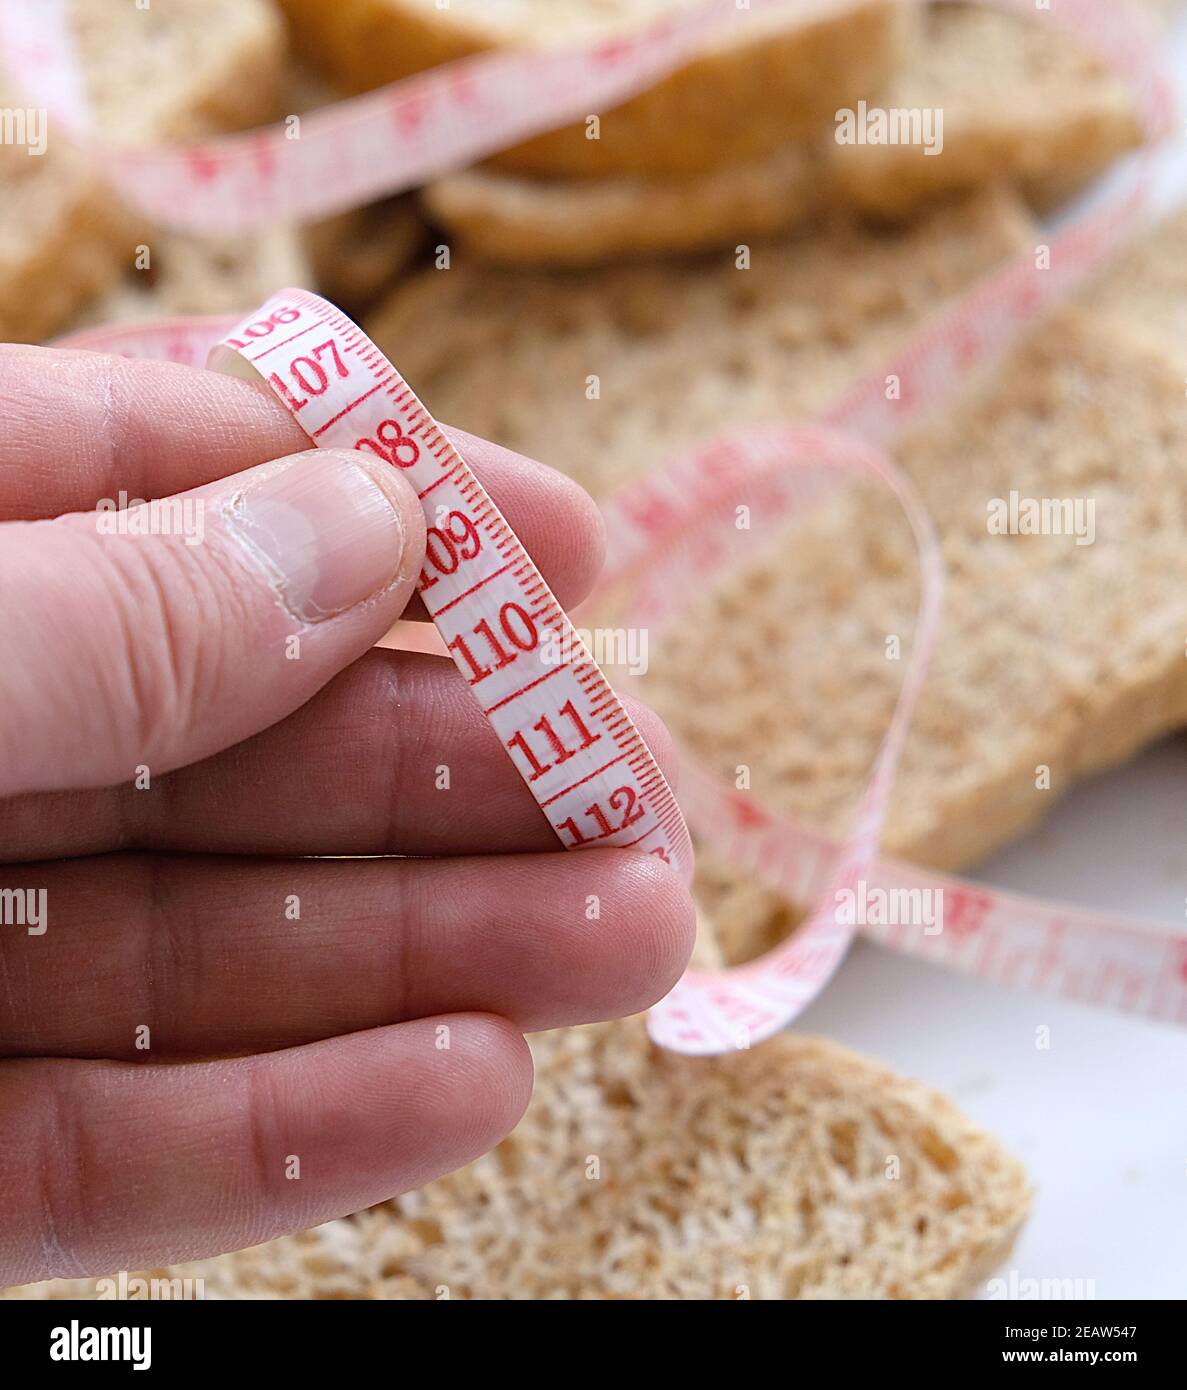 Against excessive weight gain at home, bran bread, slices of bran bread and a tape measure Stock Photo